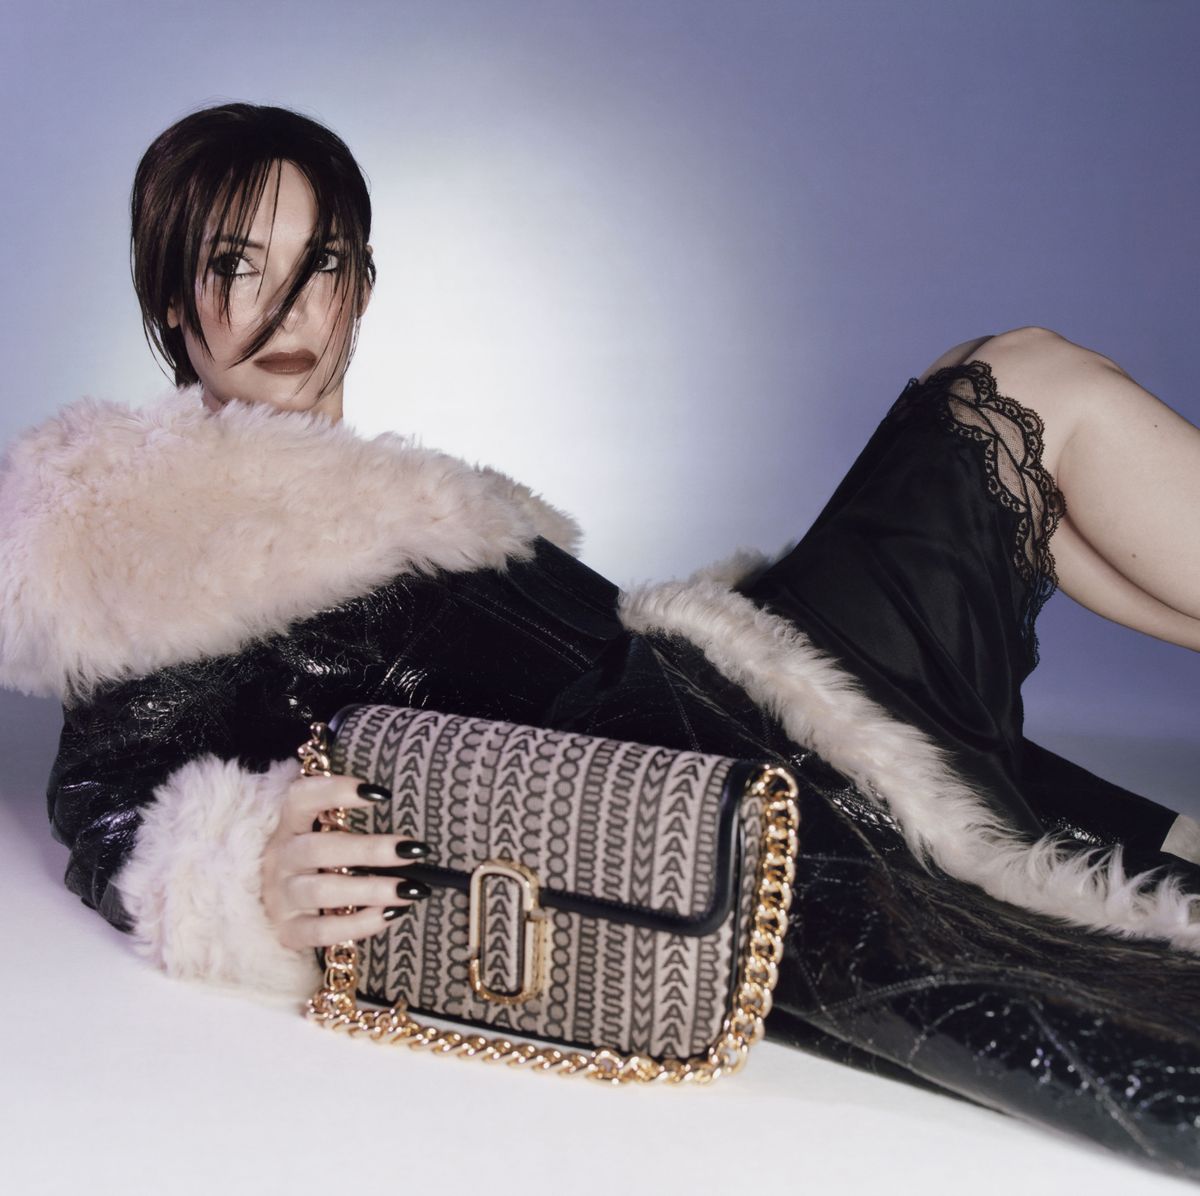 Marc Jacobs and Winona Ryder Come Full Circle for New Campaign